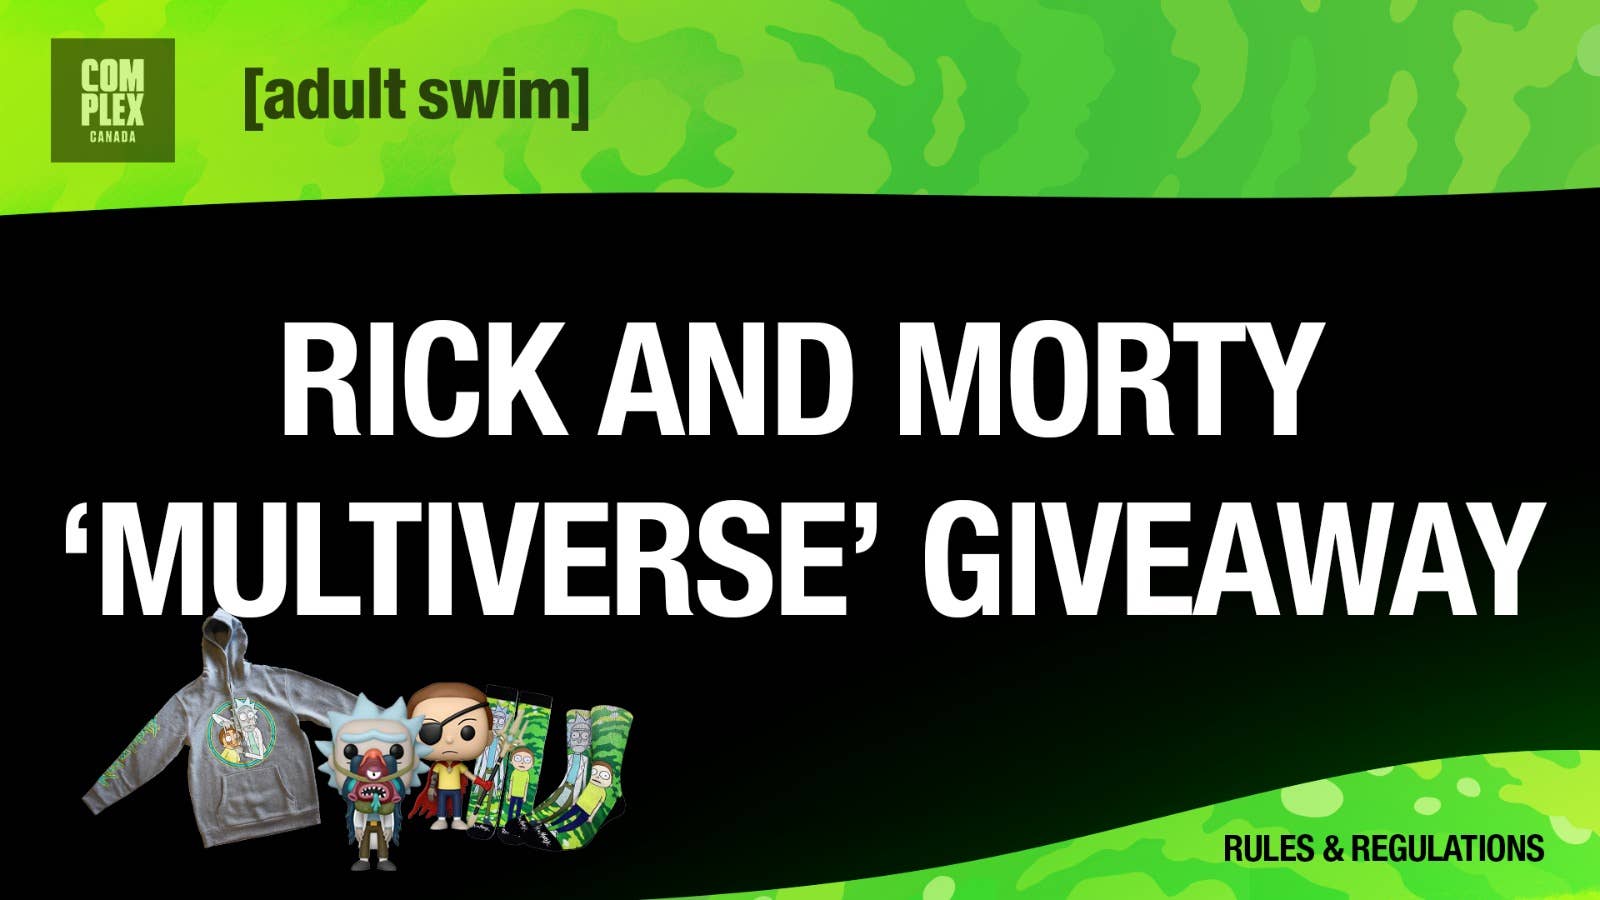 Win a Rick and Morty prize pack